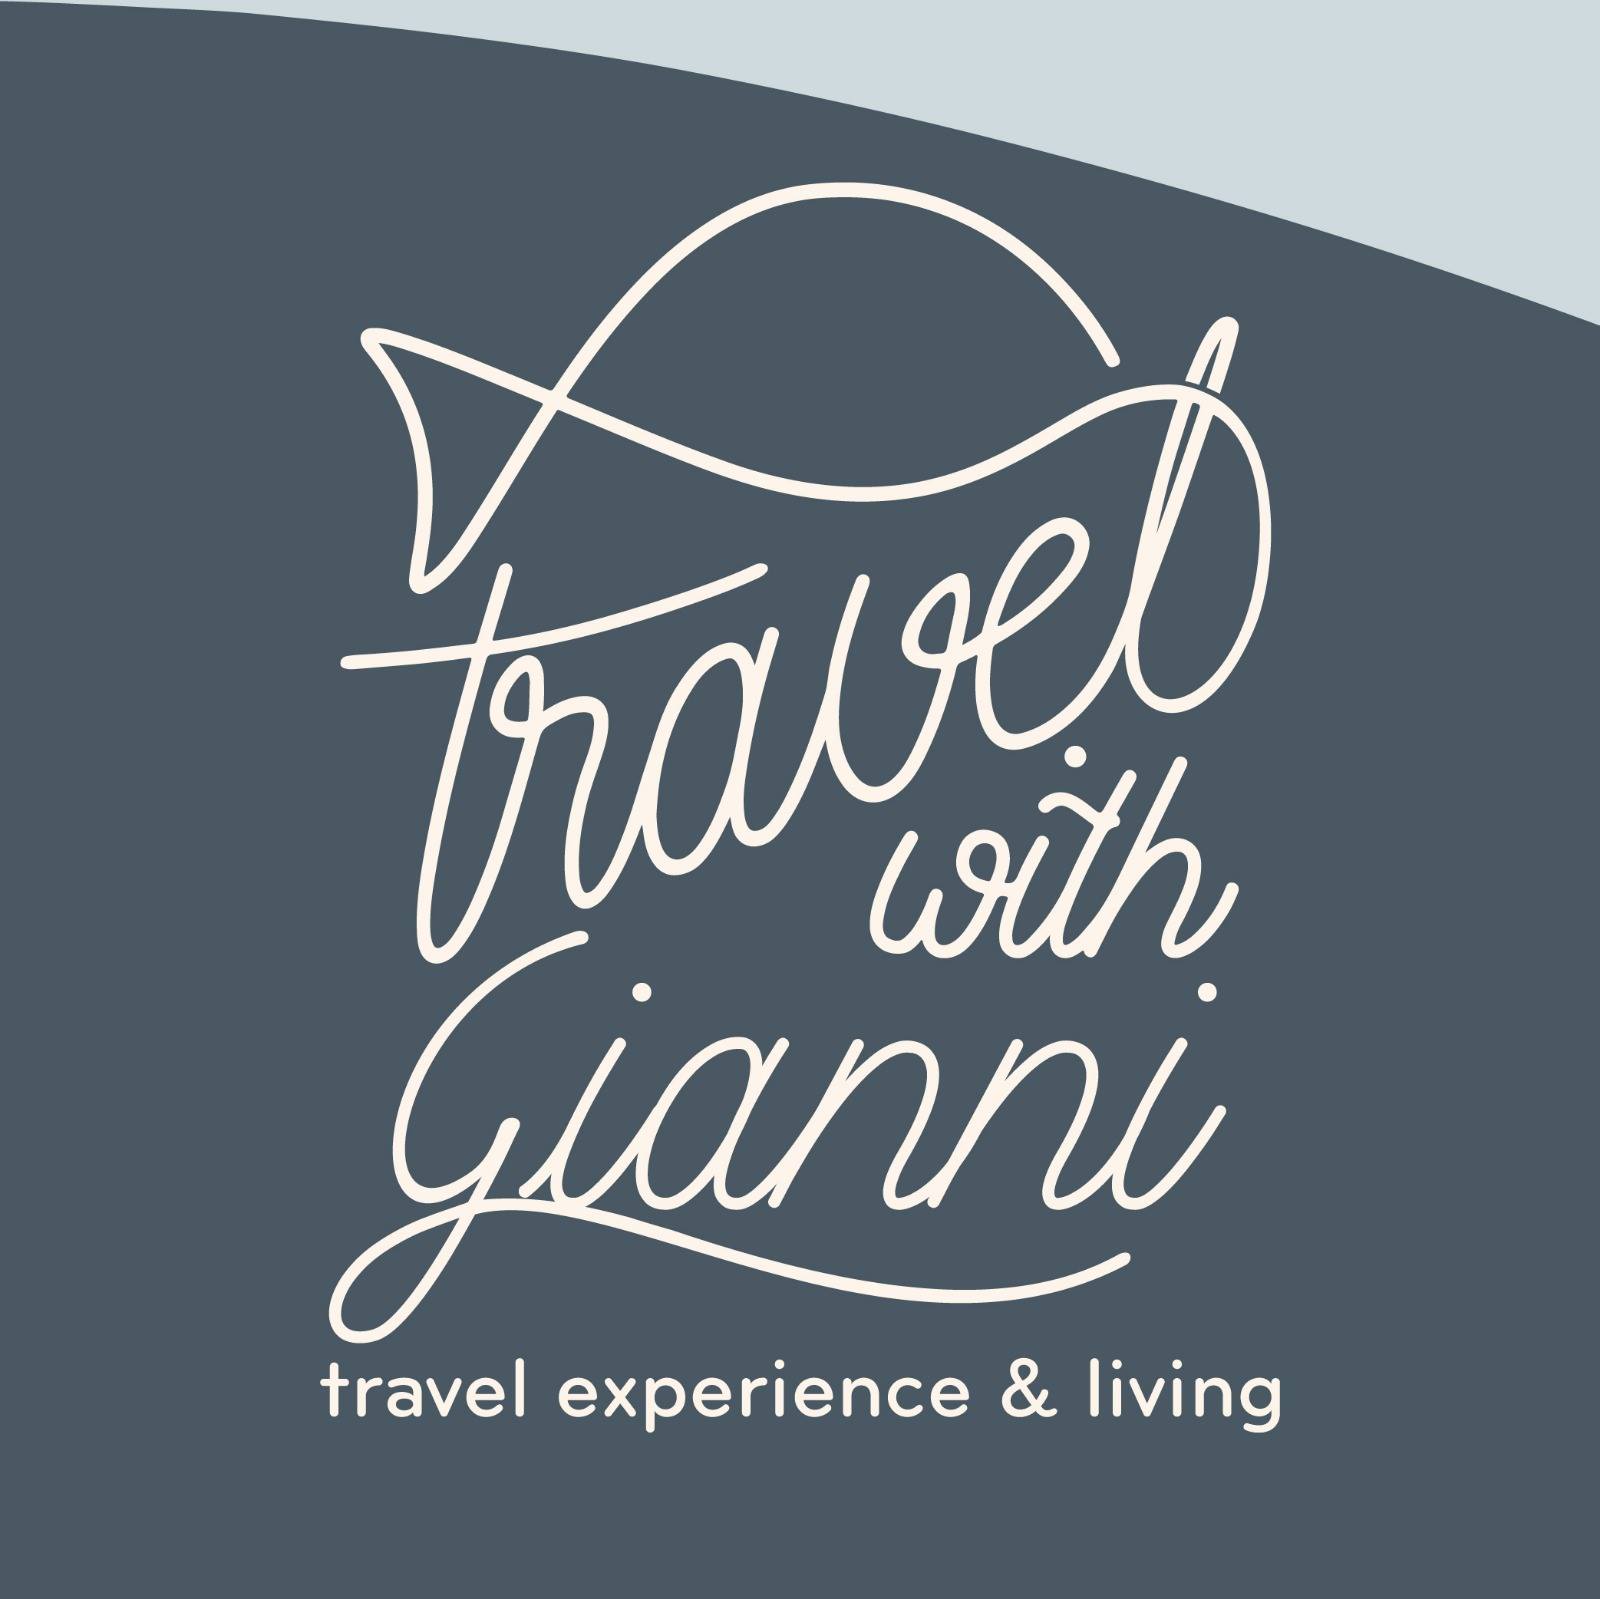 Travel With Gianni